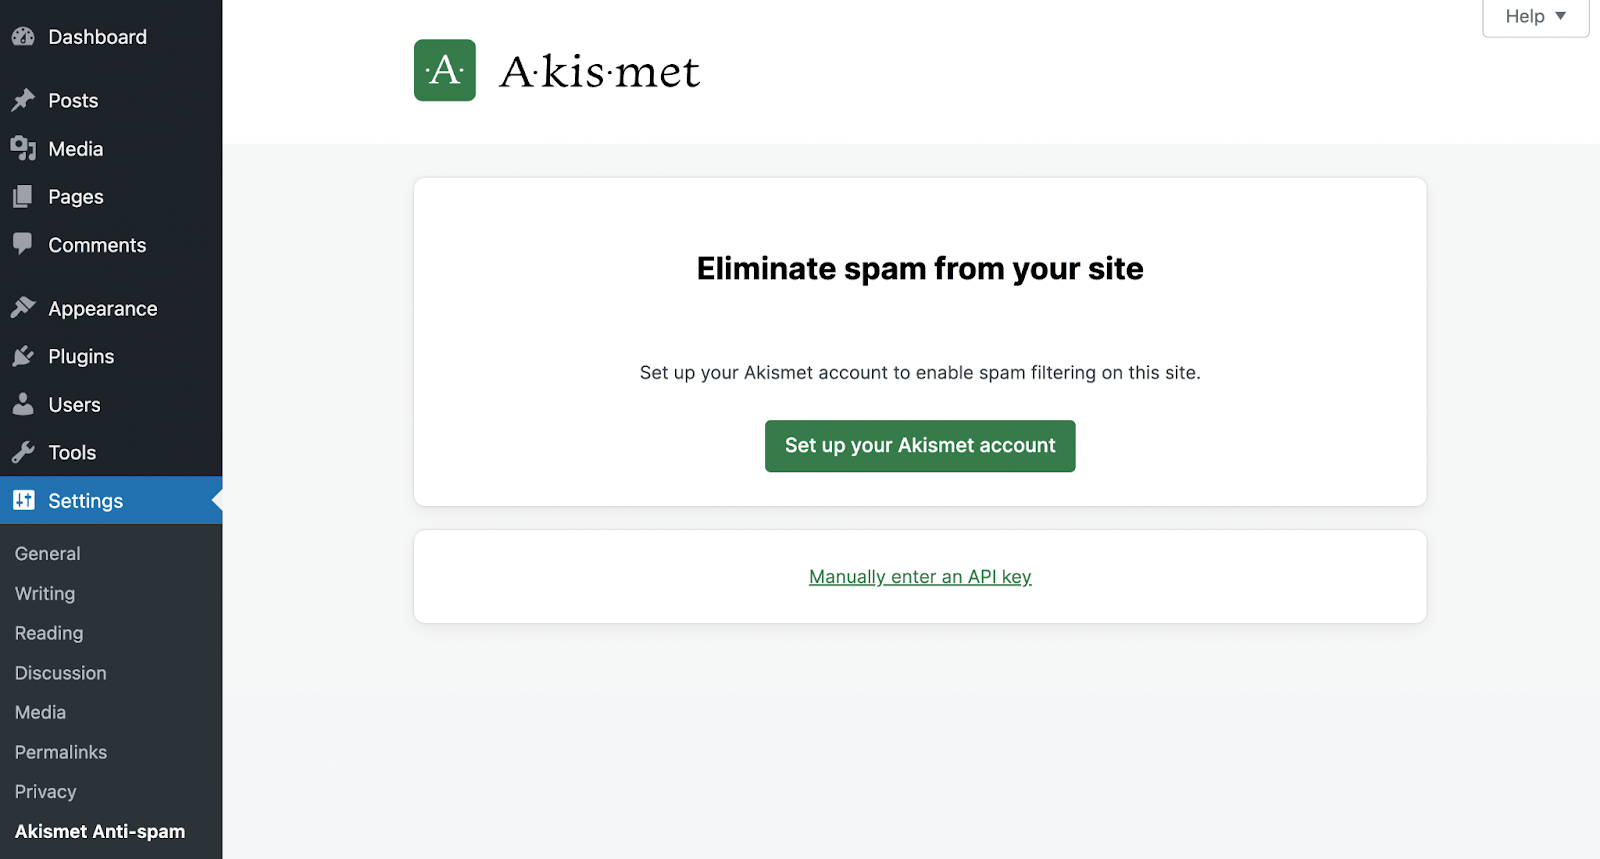 prompt to set up an Akismet account